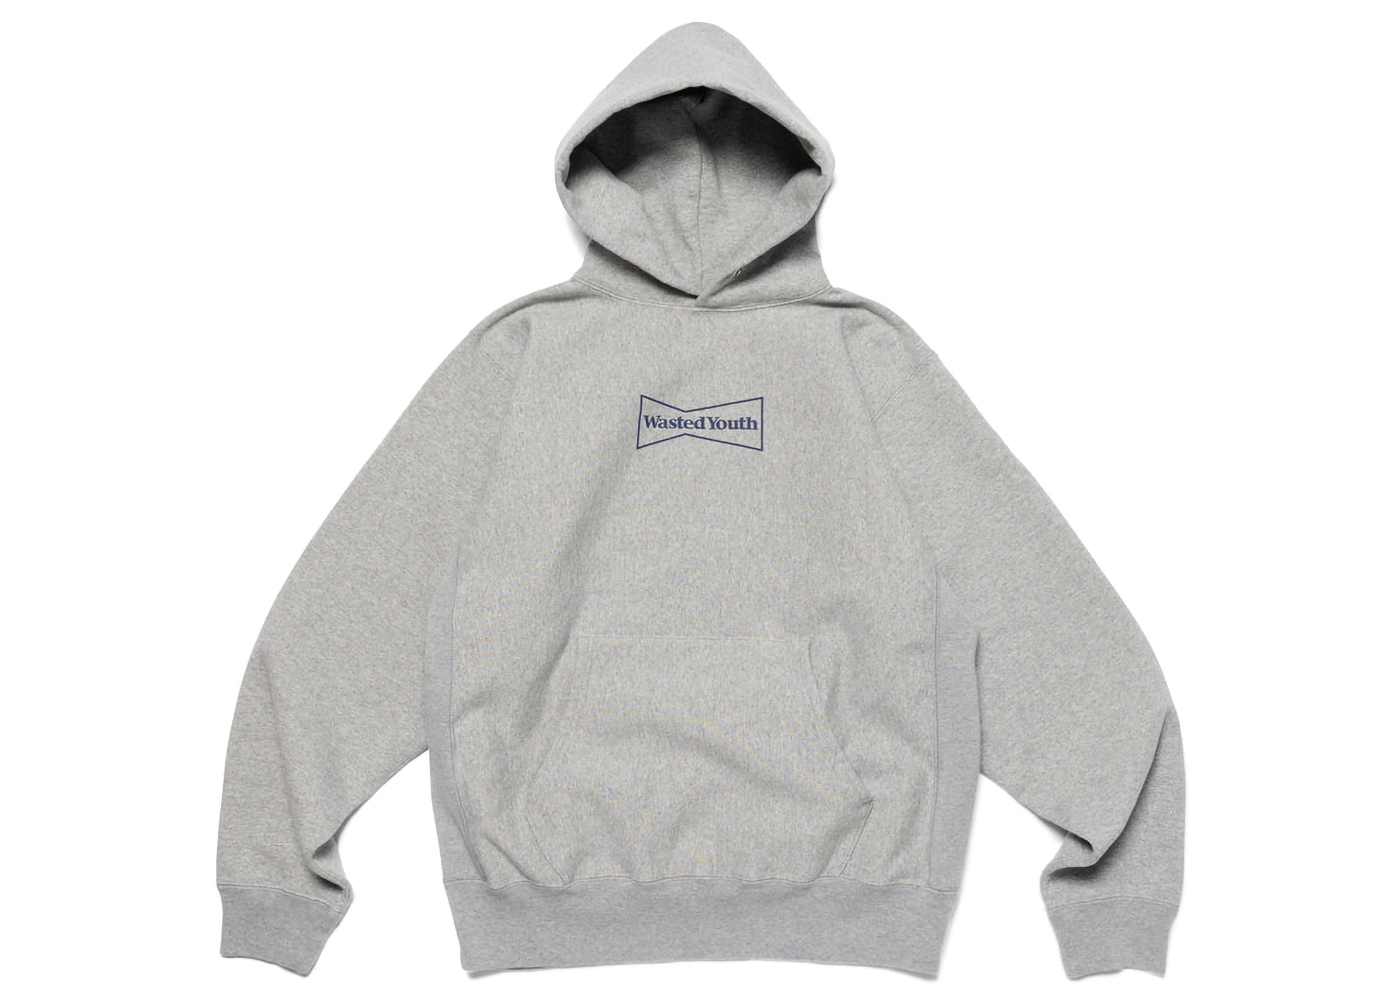 Wasted Youth Hoodie #2 Gray XL 新品未使用-